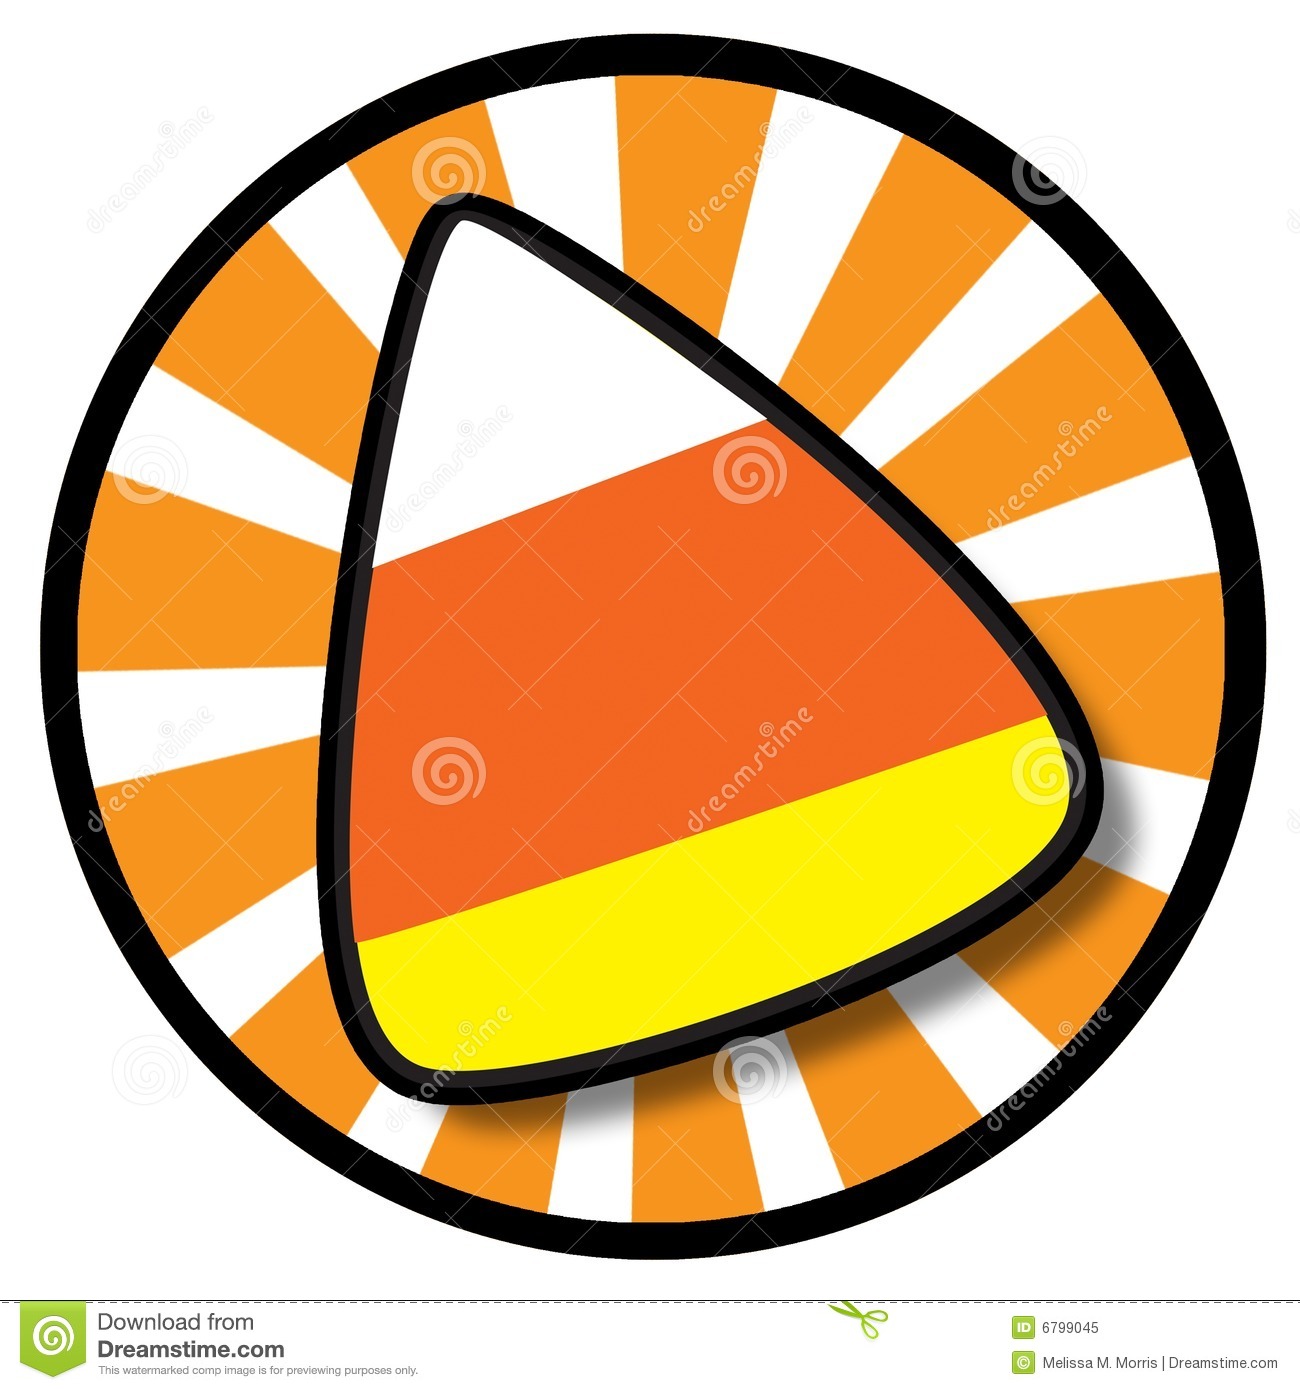 Candy Corn Clipart Black And White Candy Corn Icon 6799045 Jpg